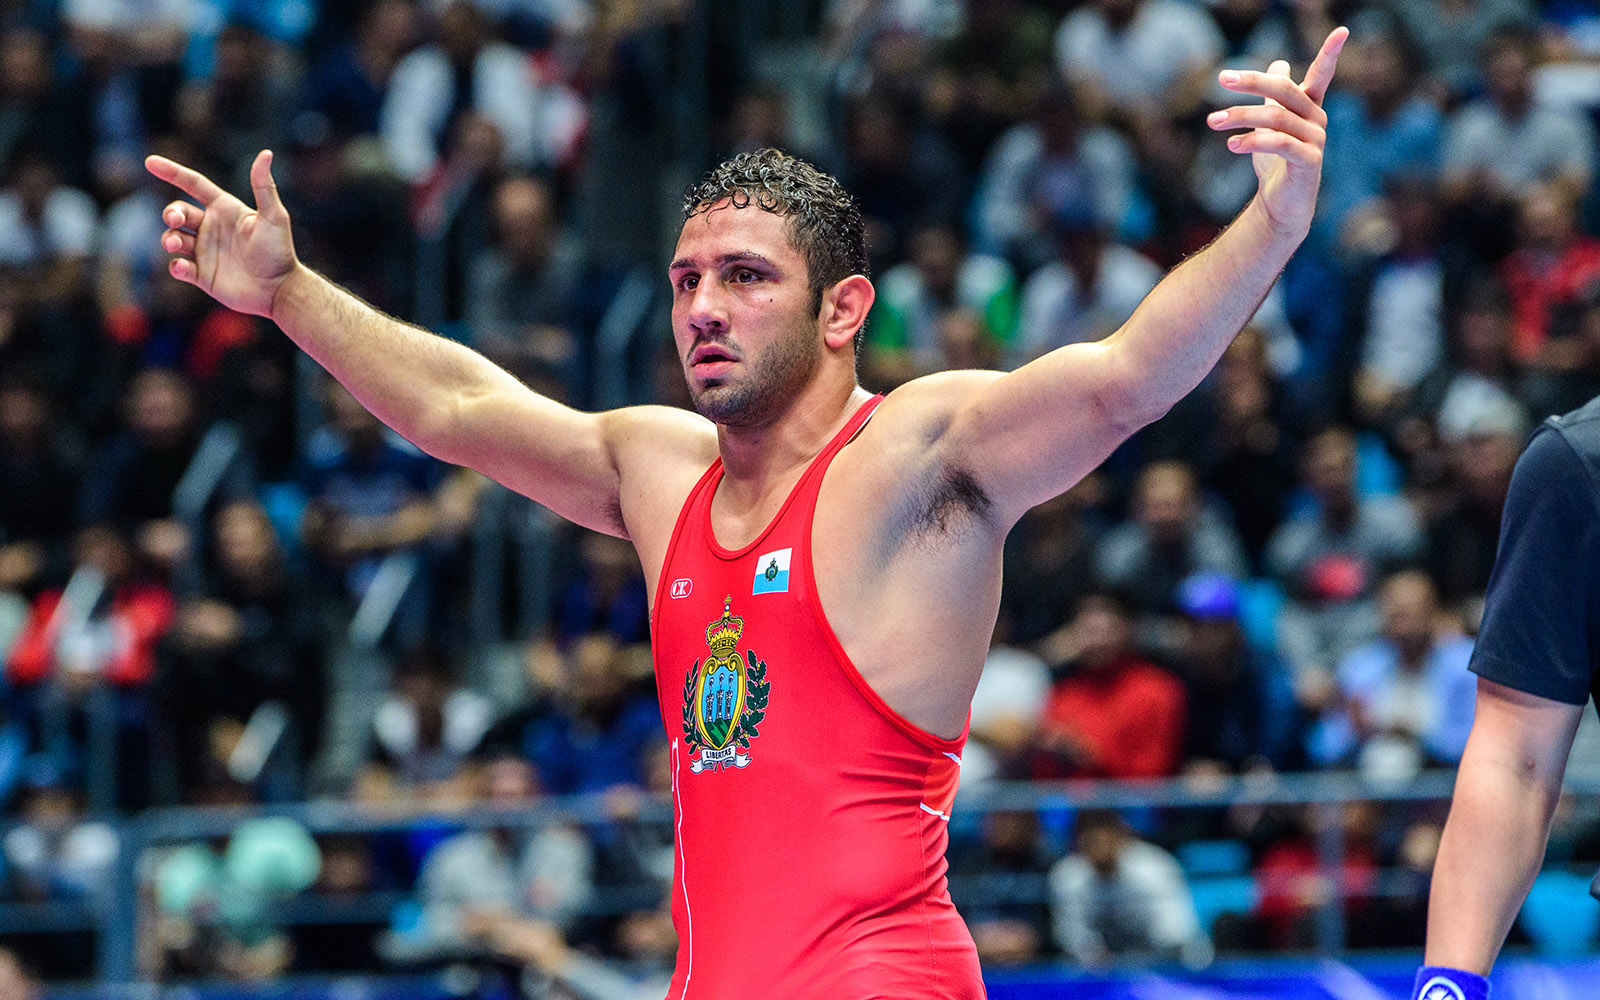 Micic, Amine Use FifthPlace World Finishes to Qualify for 2020